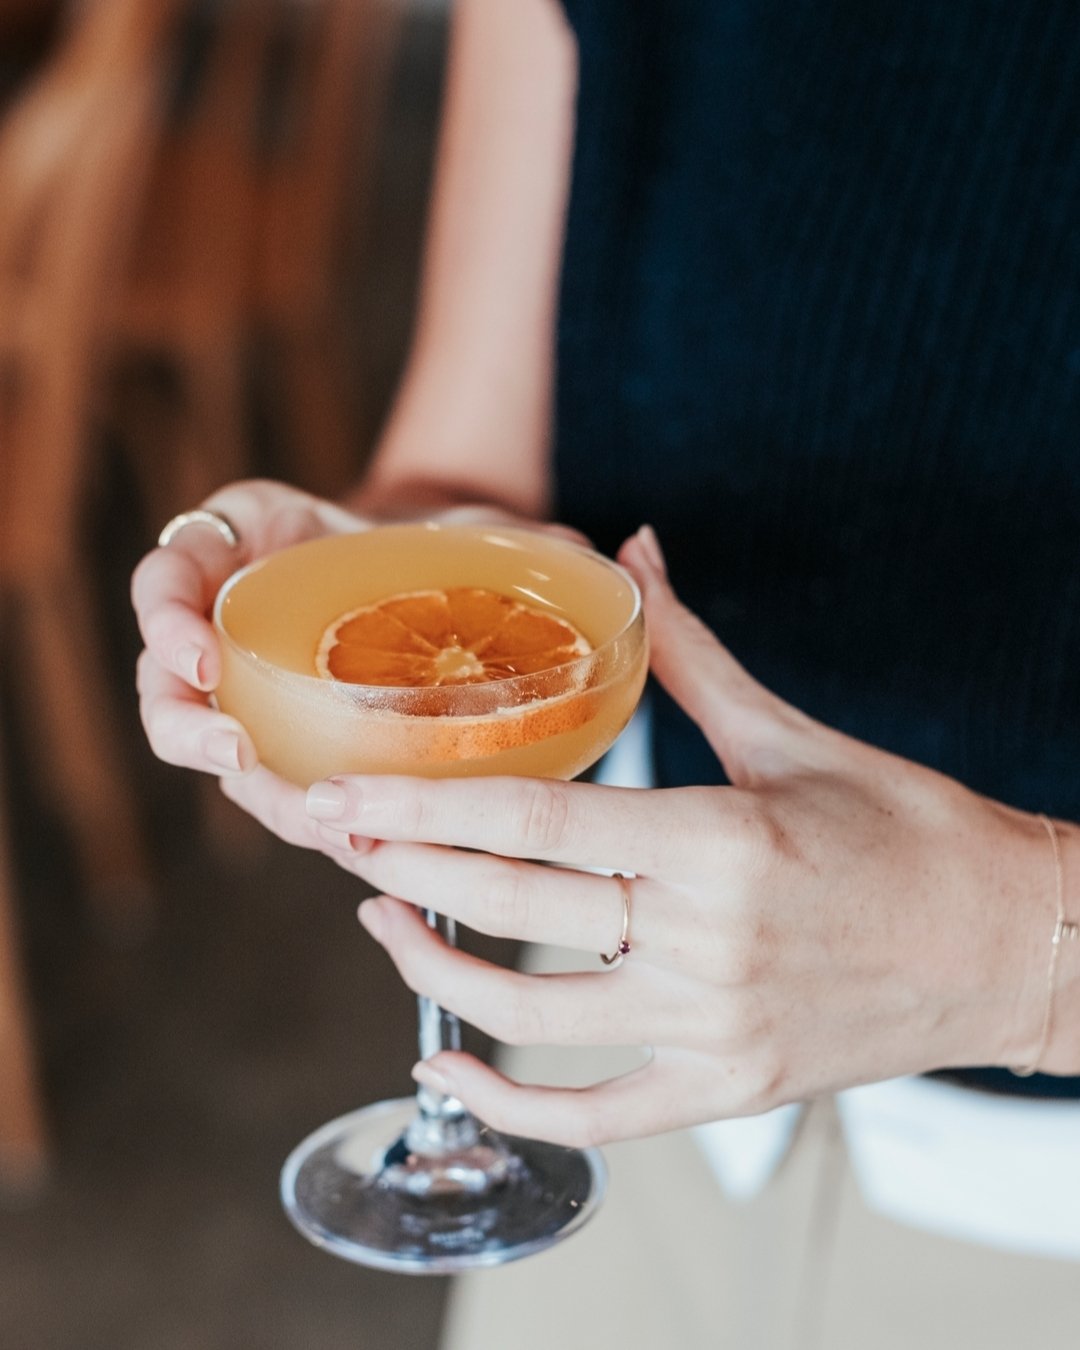 Raise a glass, it's the weekend. 🍸

Don't forget, we're now open for dinner on Friday and Saturday evenings from 5pm. Give us a call or jump online to book. 
 
 
 
 

 
 
 
 

 
 #kincafe #kinburraneer #cafeburraneer #sutherlandshirecafe  #sutherlan